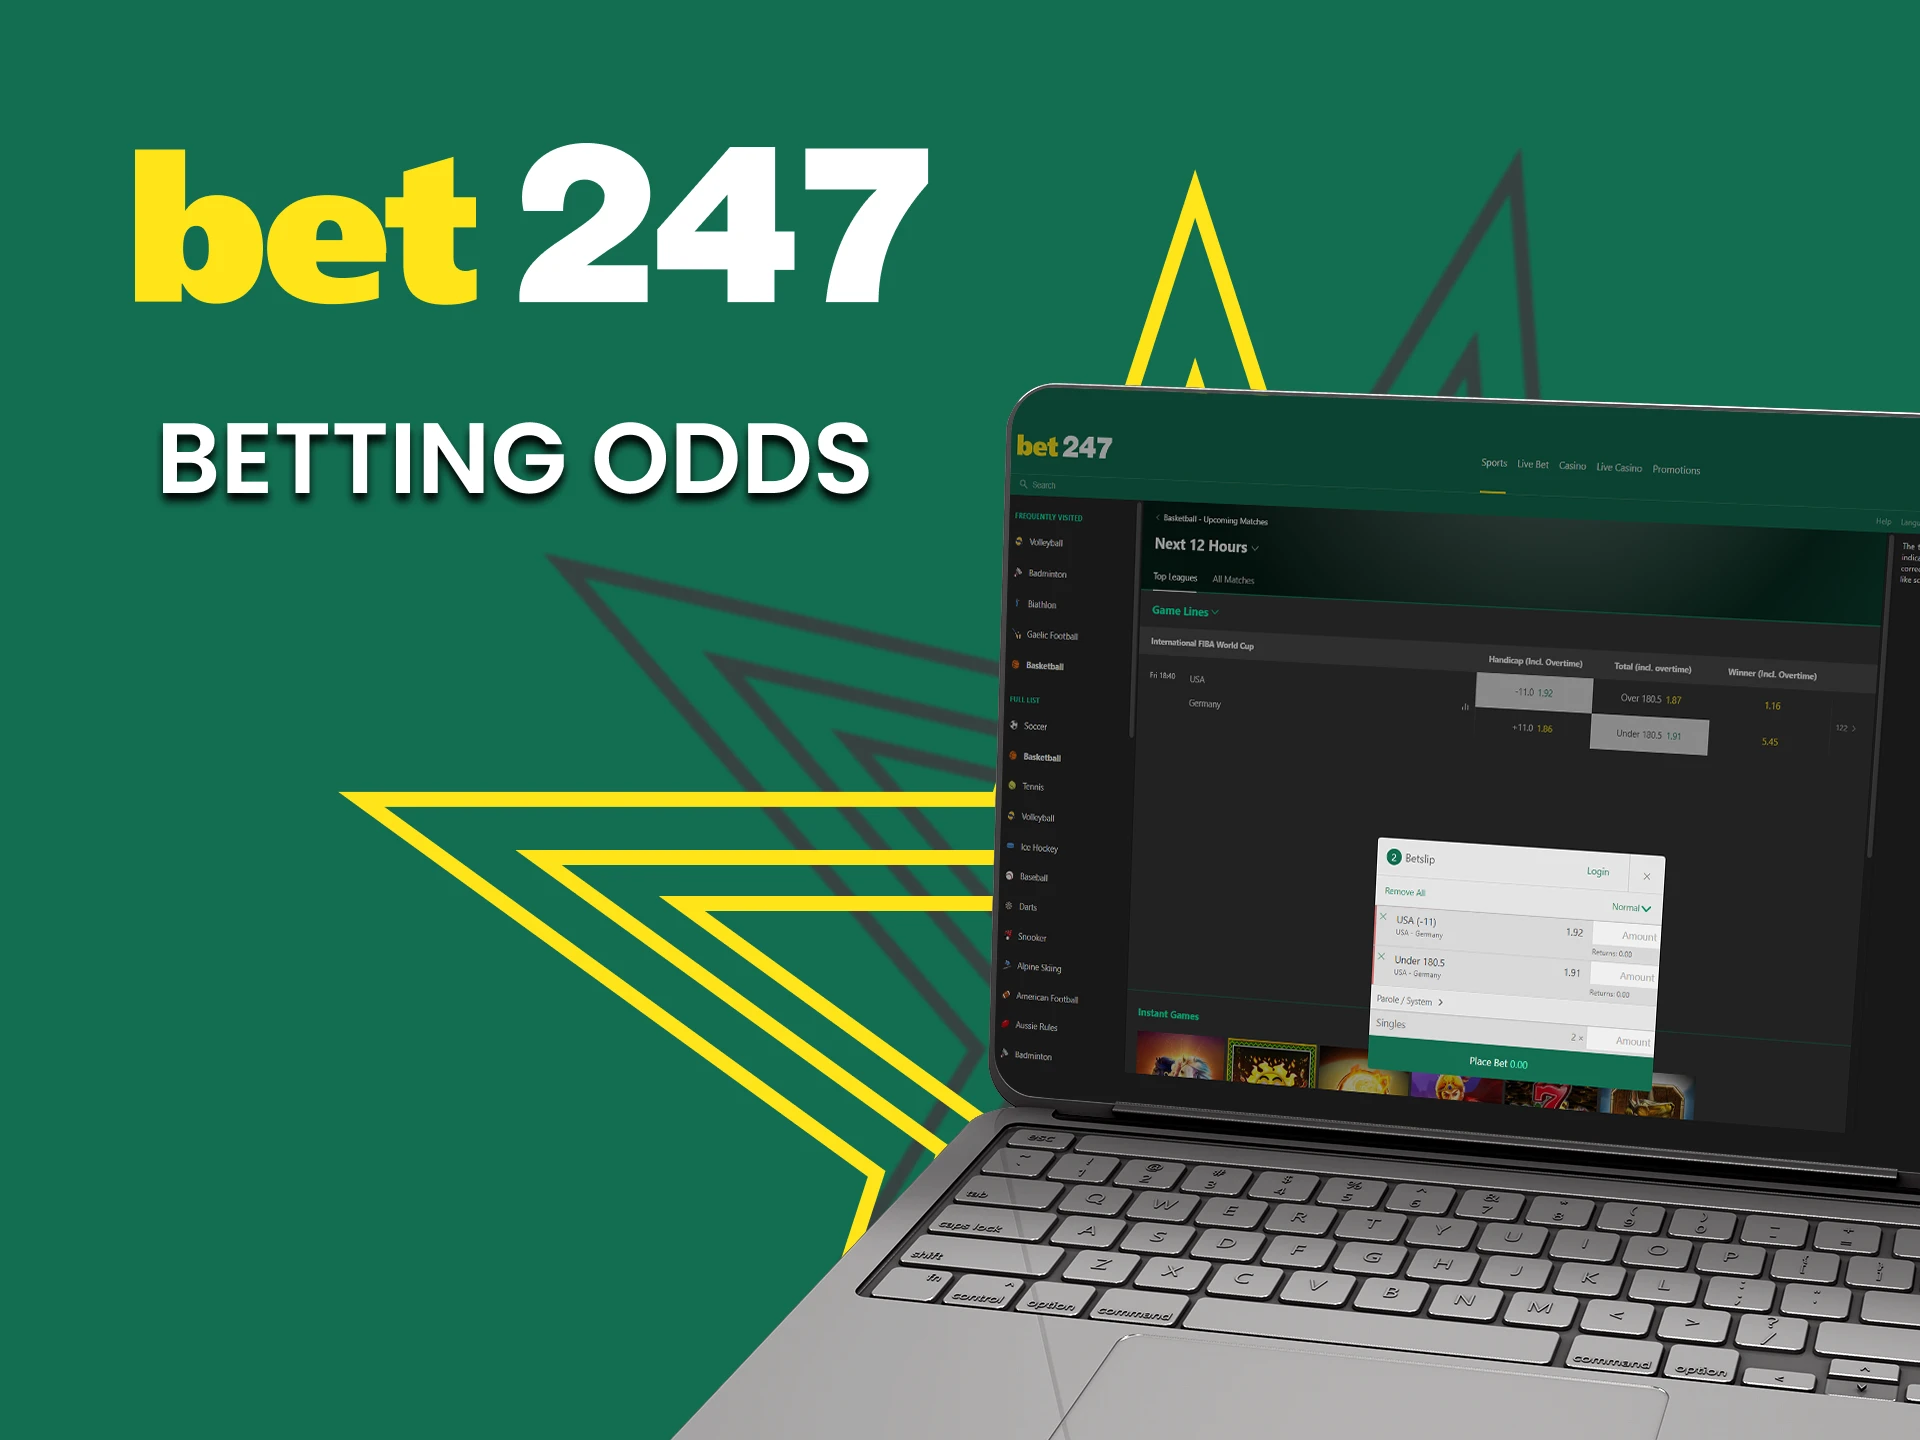 Bet247 offering the best odds.